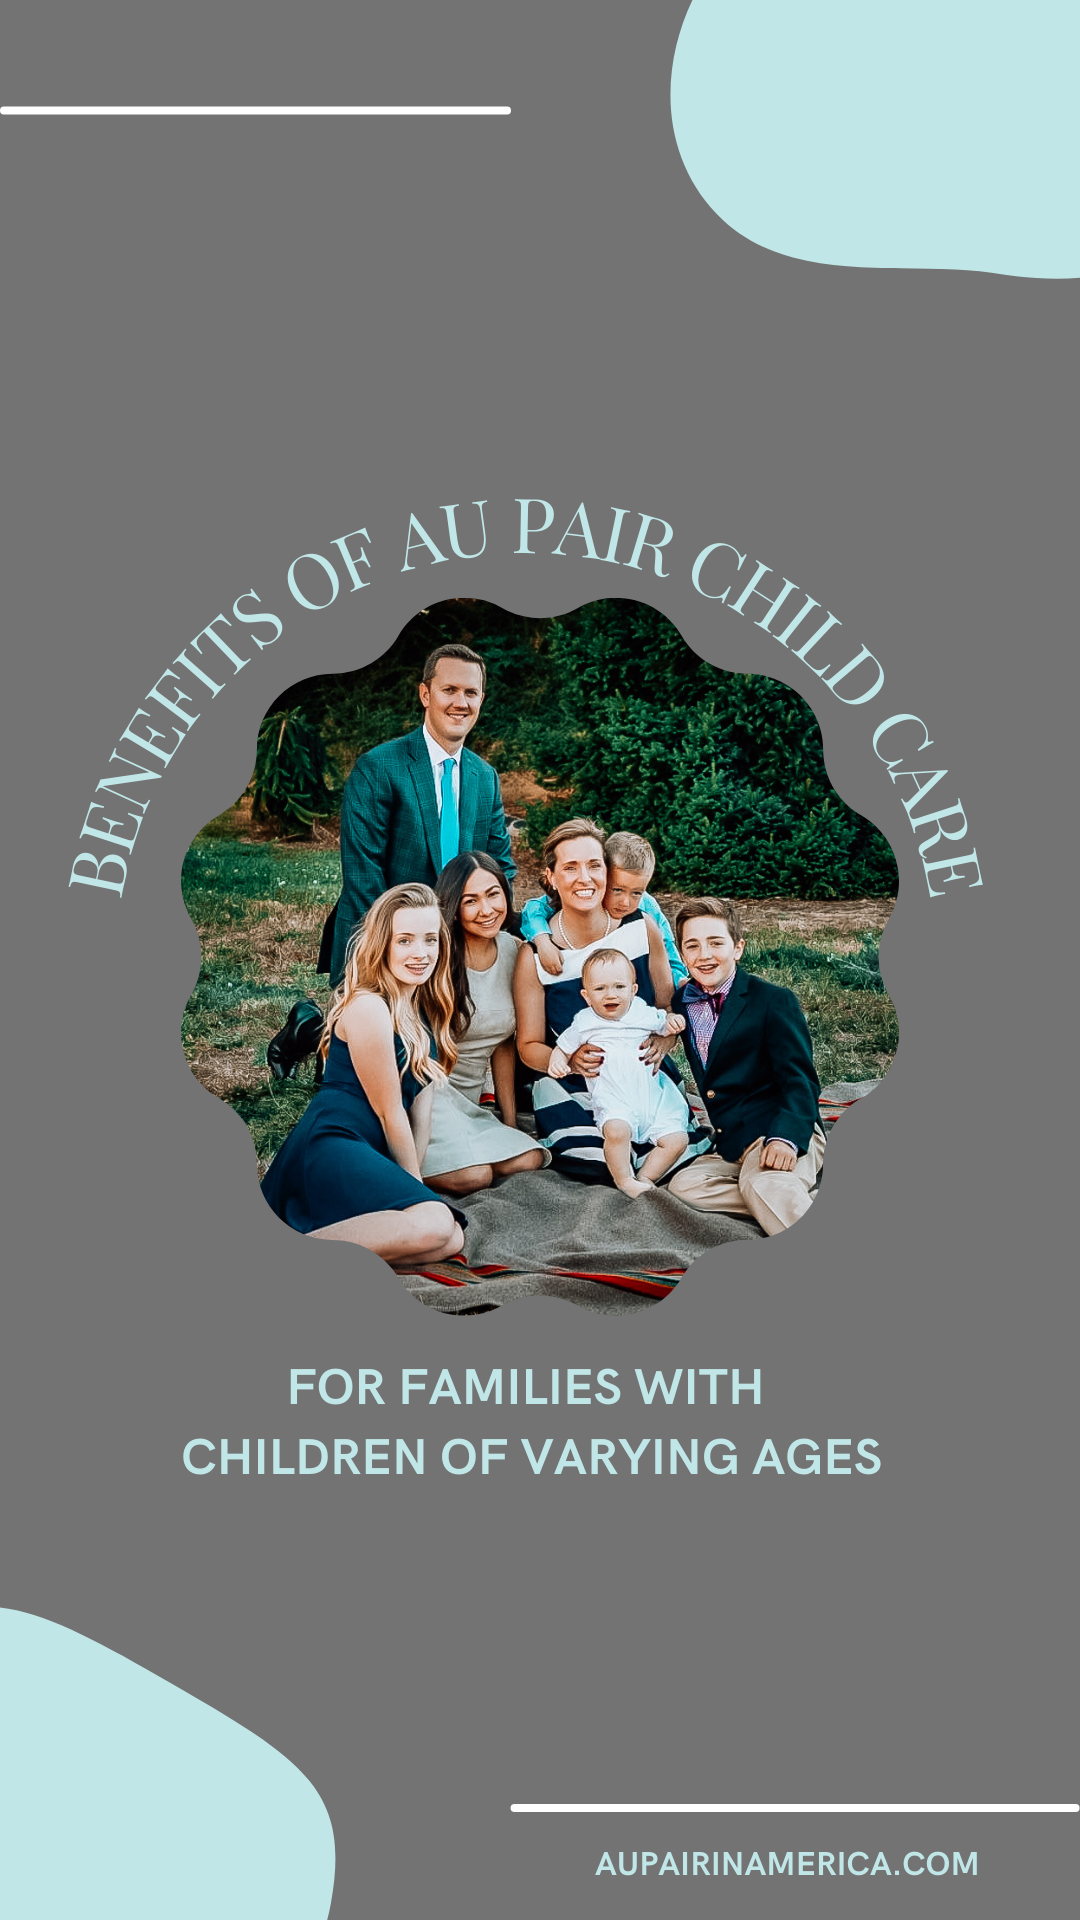 Benefits of au pair child care for families with children of varying ages